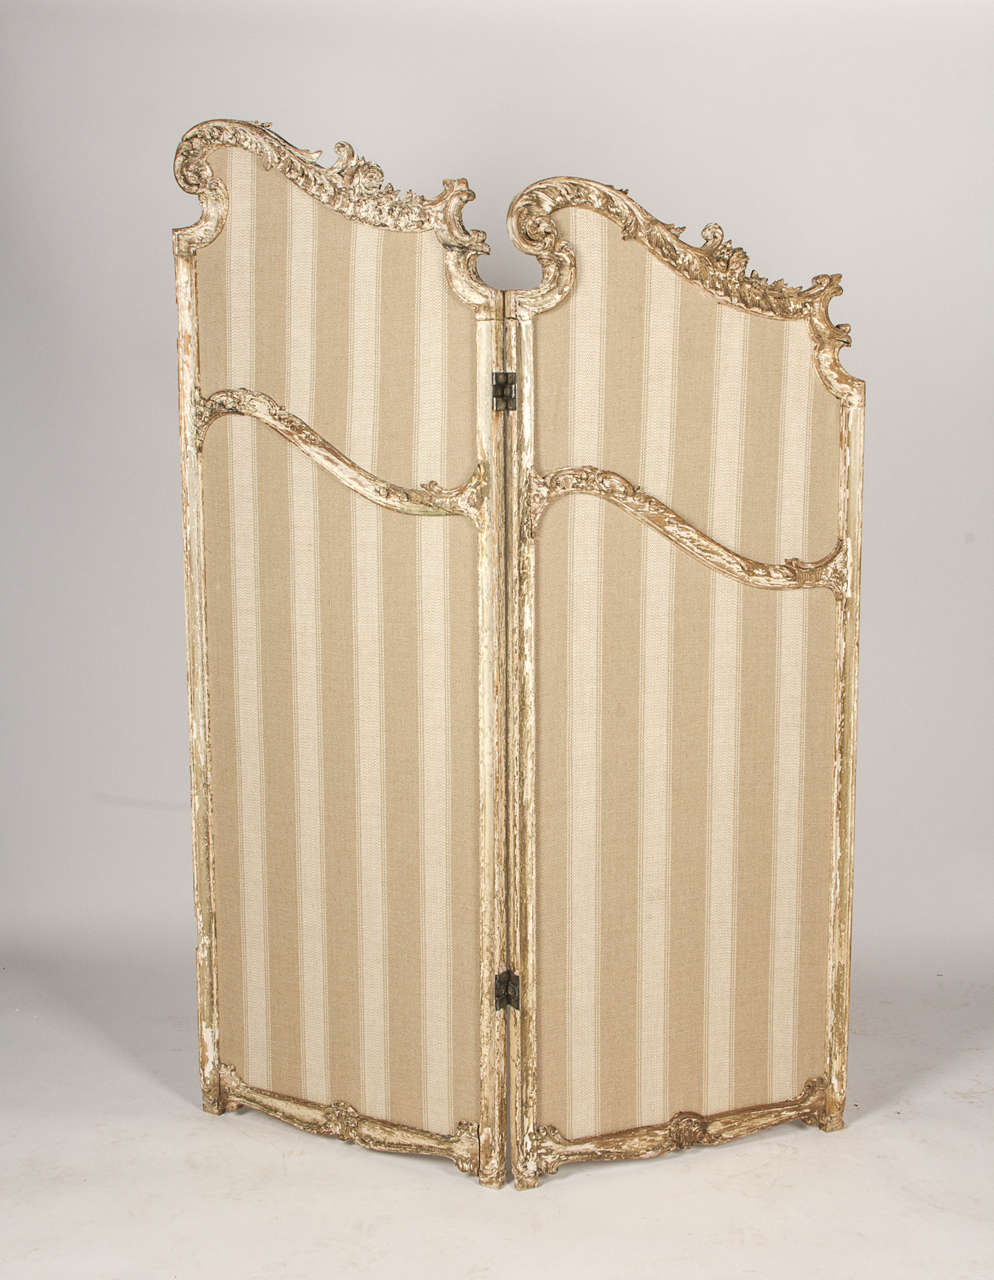 This room divider has a beautiful patina throughout the carved wooden details of the frame. The four panels are connected as two sets of two - the hinge hardware connecting the middle section was removed.

Re-upholstered in Ralph Lauren fabric